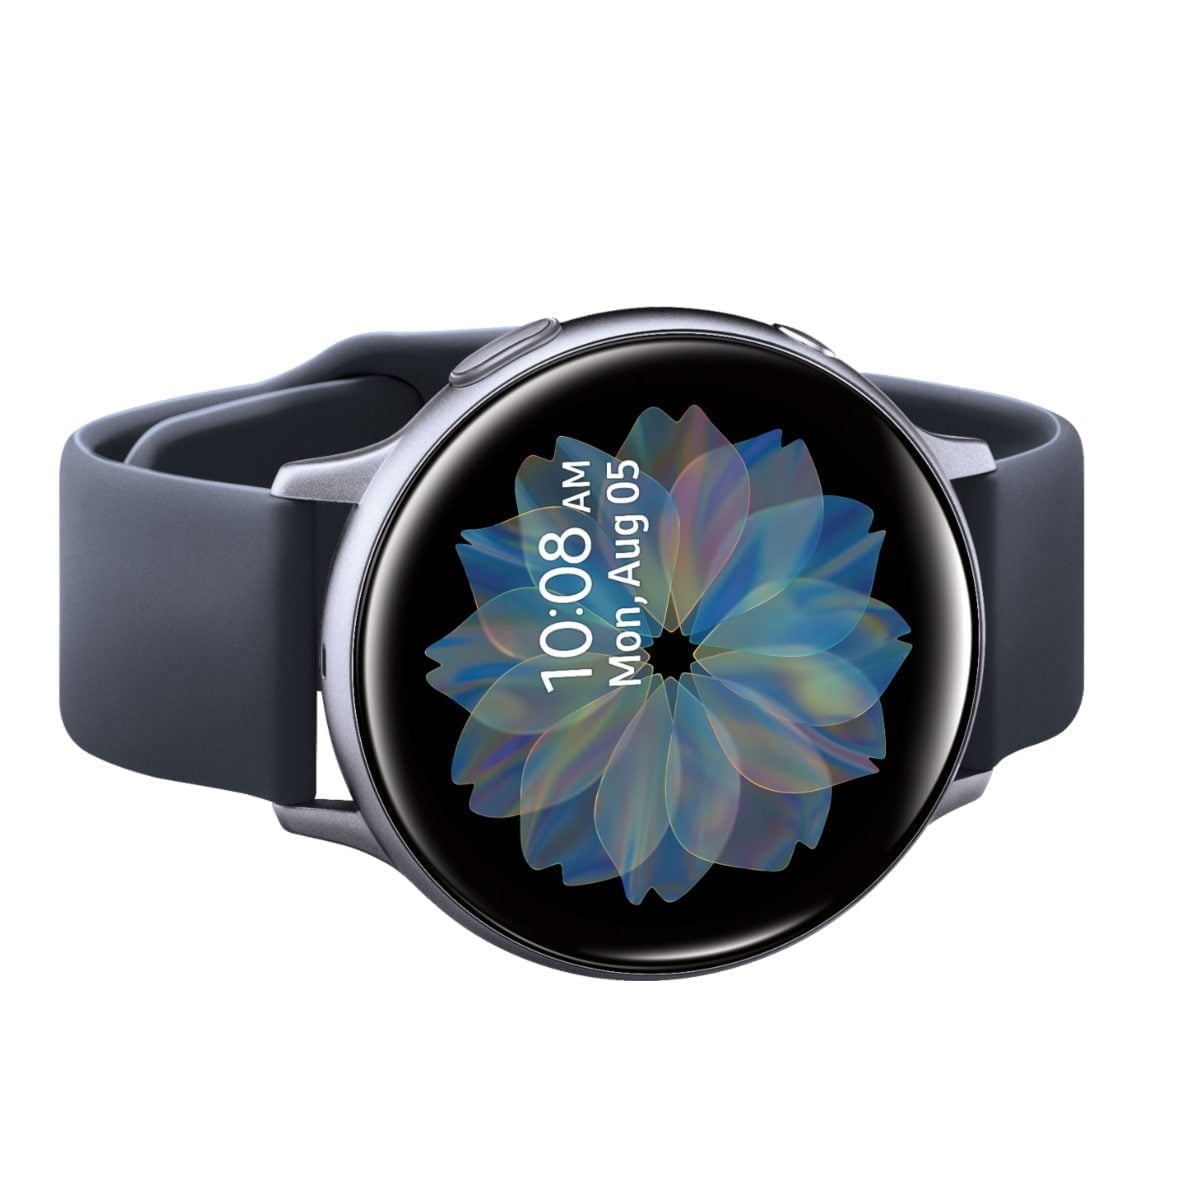 6360438Cv13D Scaled Samsung &Lt;H1 Class=&Quot;Heading-5 V-Fw-Regular&Quot;&Gt;Samsung - Galaxy Watch Active2 Smartwatch 44Mm Aluminum - Aqua Black &Lt;Strong&Gt;Model&Lt;/Strong&Gt;:&Lt;Span Class=&Quot;Product-Data-Value Body-Copy&Quot; Style=&Quot;Color: #333333; Font-Size: 16Px;&Quot;&Gt;Sm-R820Nzkaxar&Lt;/Span&Gt;&Lt;/H1&Gt; Https://Www.youtube.com/Watch?V=Cu0-Lhyhgu4 &Lt;Div Class=&Quot;Long-Description-Container Body-Copy &Quot;&Gt; &Lt;Div Class=&Quot;Html-Fragment&Quot;&Gt; &Lt;Div&Gt; &Lt;Div&Gt;Enhance Your Sporting Performance With This Samsung Galaxy Watch Active2 Bluetooth Smartwatch. Monitor Your Workouts And Receive Detailed Reports On Your Performance Even As The Running Coach Feature Gives You Important Insight In Real-Time. This Samsung Galaxy Watch Active2 Bluetooth Smartwatch Analyses Your Sleep Pattern And Offers Helpful Advice On How To Improve It.&Lt;/Div&Gt; &Lt;/Div&Gt; &Lt;/Div&Gt; &Lt;/Div&Gt;  Samsung Galaxy Watch Active2 Samsung Galaxy Watch Active2 Smartwatch 44Mm Aluminum - Aqua Black